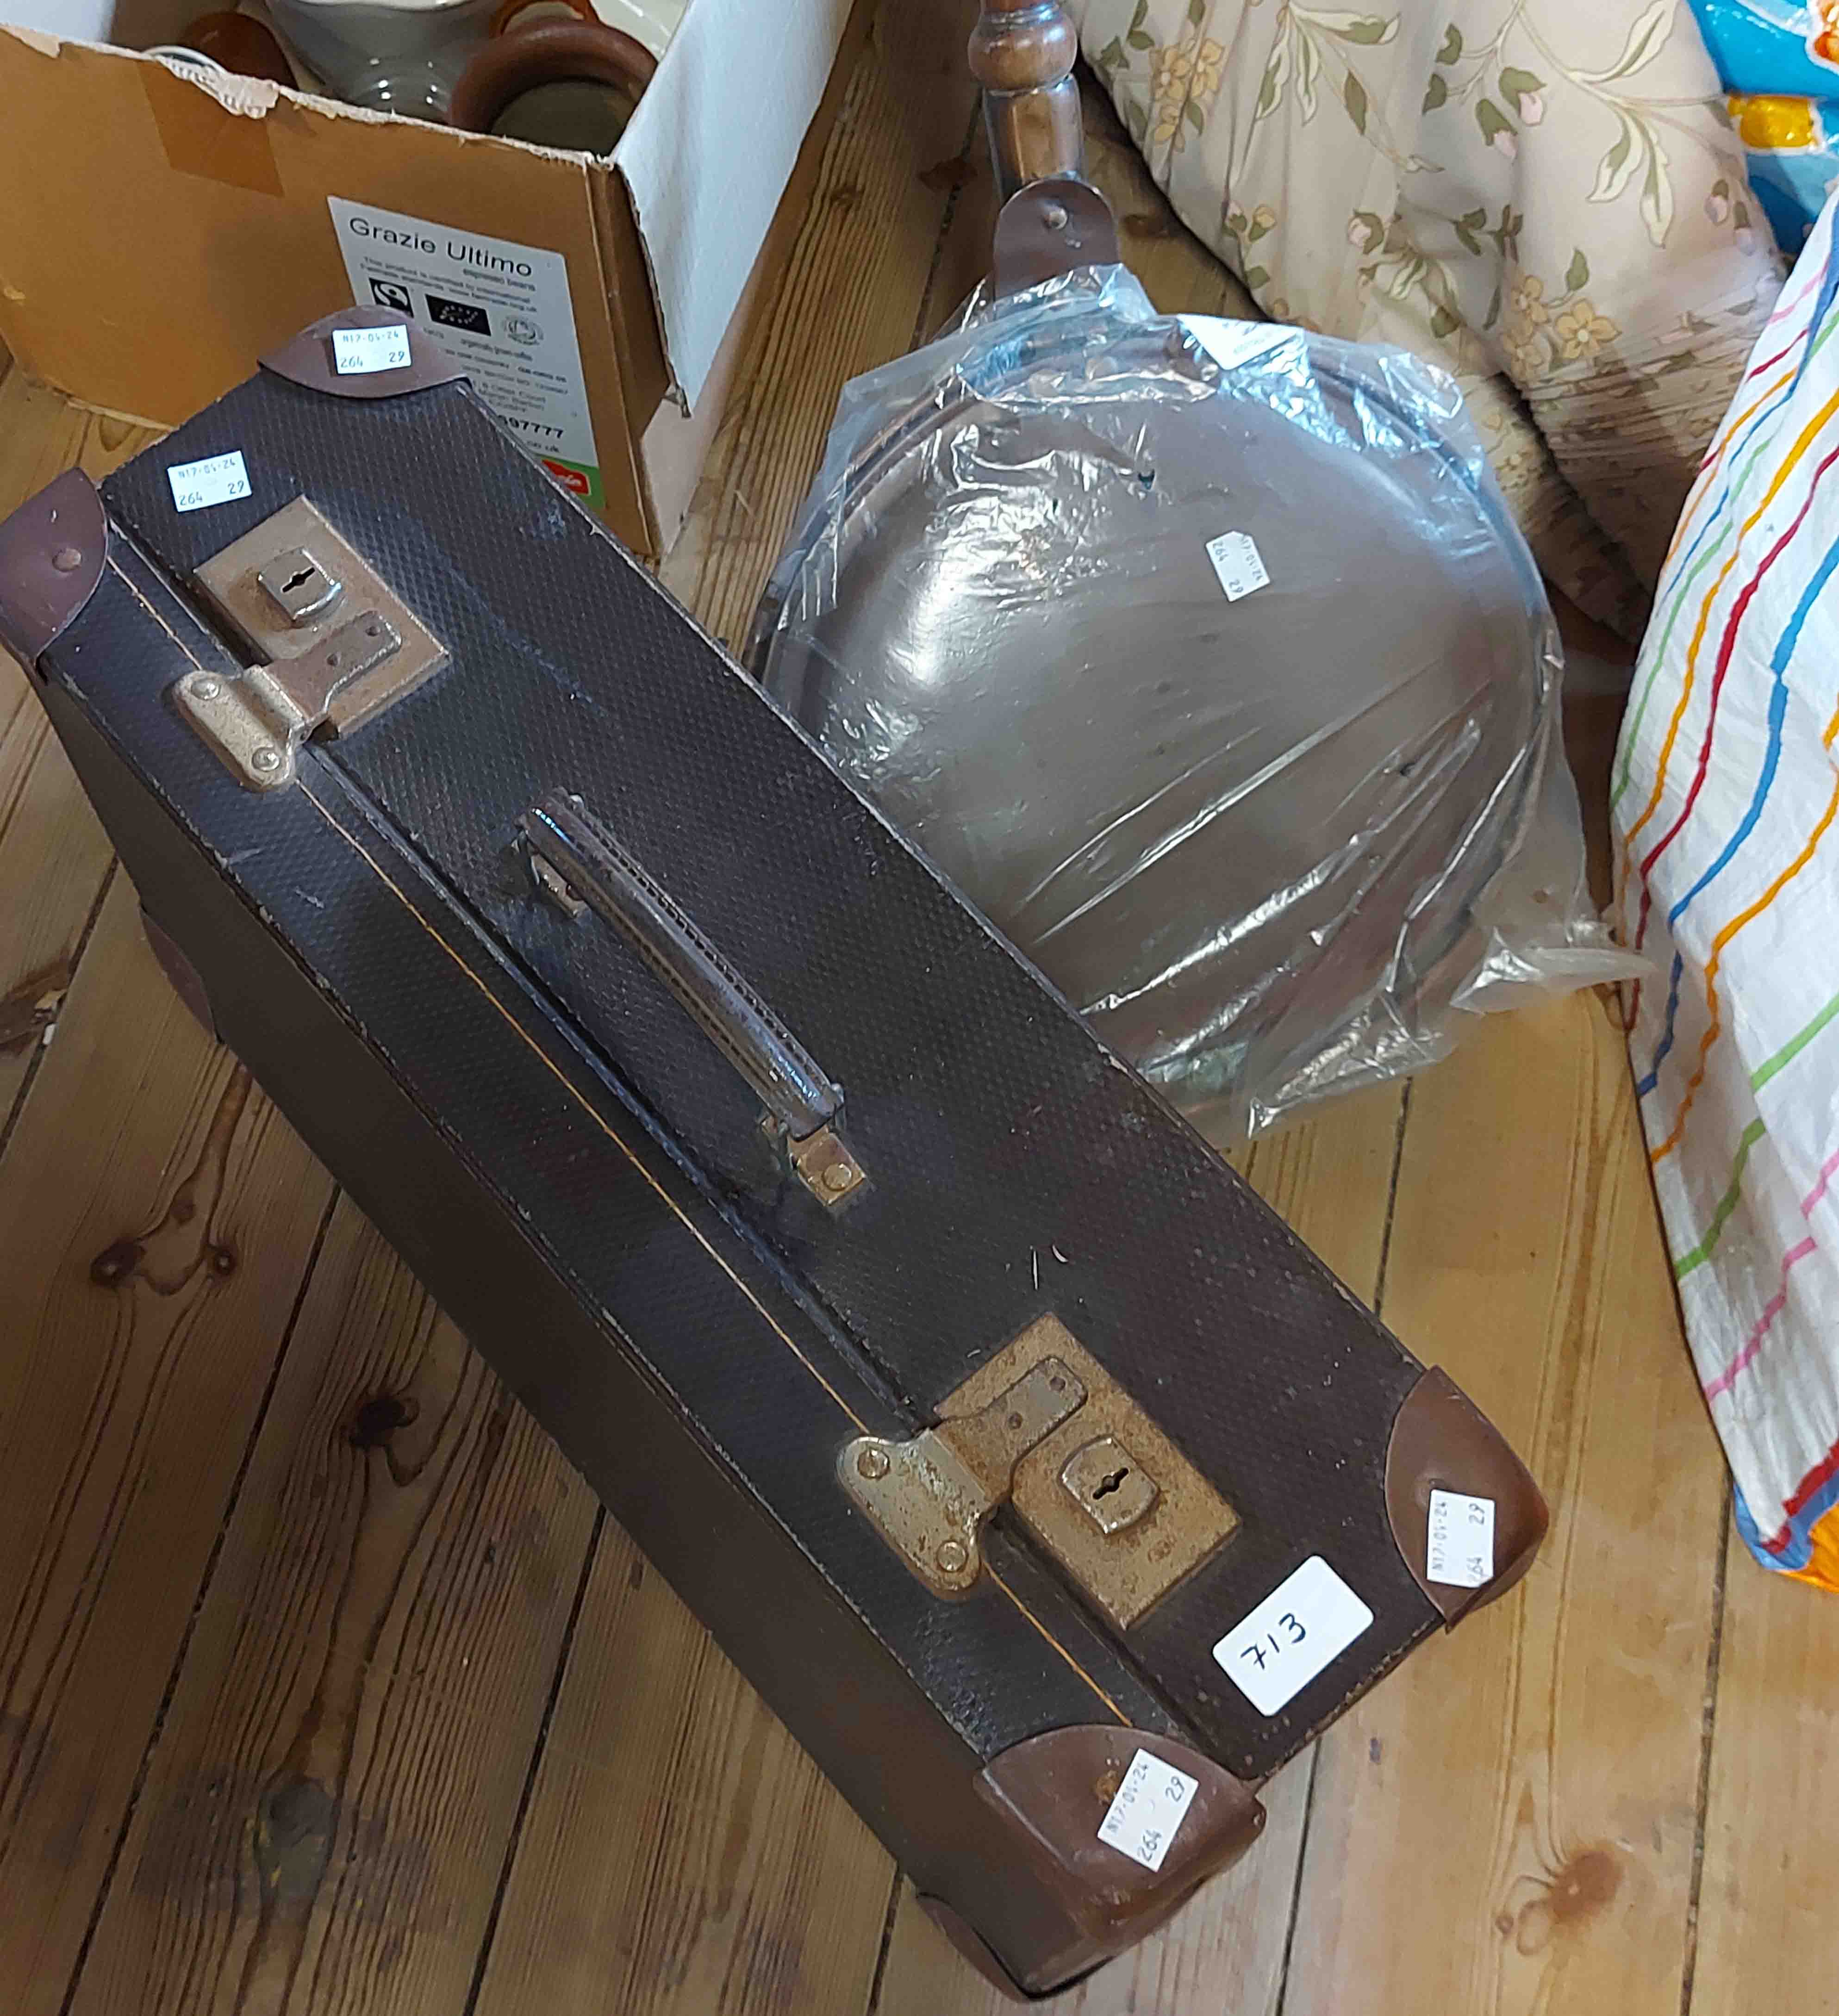 A vintage brown fibreboard suitcase - sold with a warming pan